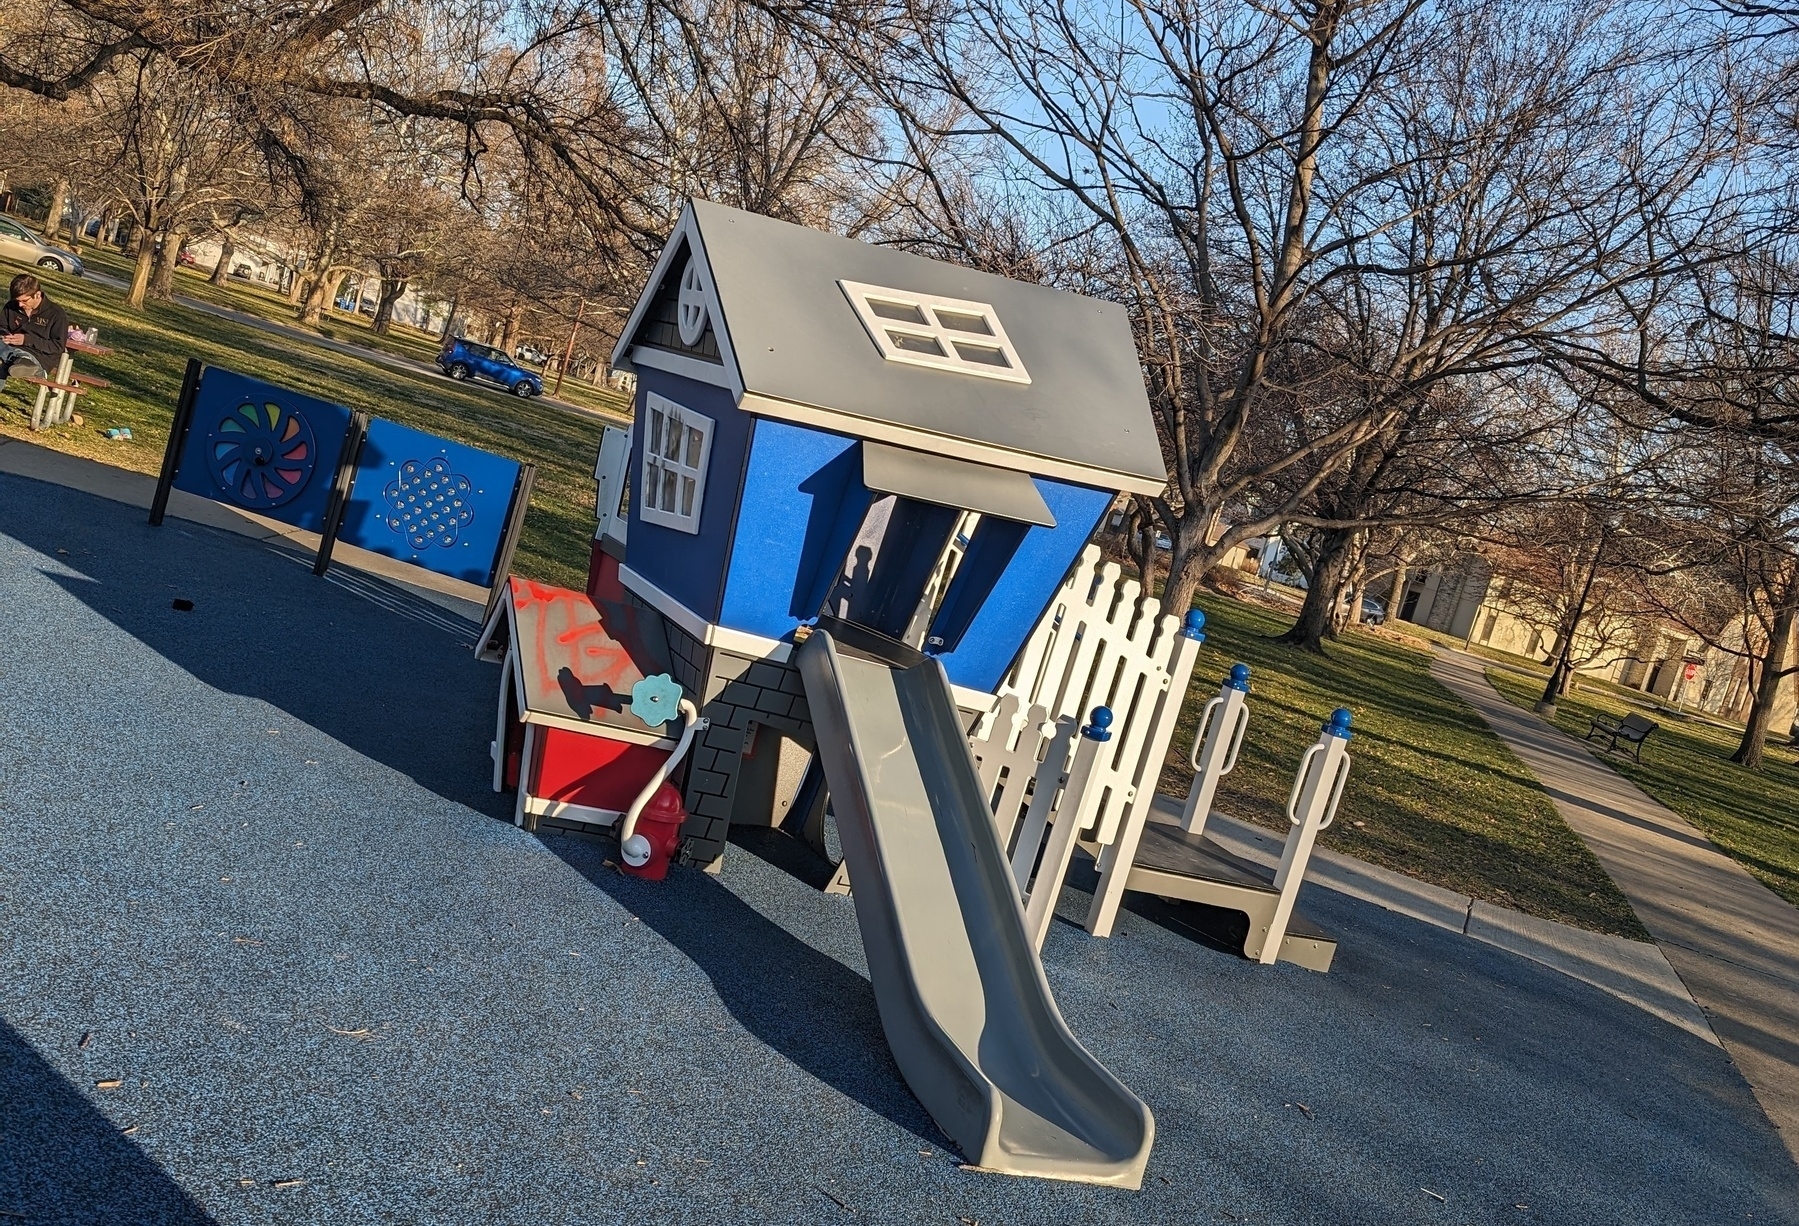 Photo of a children's playhouse at a park. The walls of the home are all at interesting angles. There is a small slide exiting the near wall.